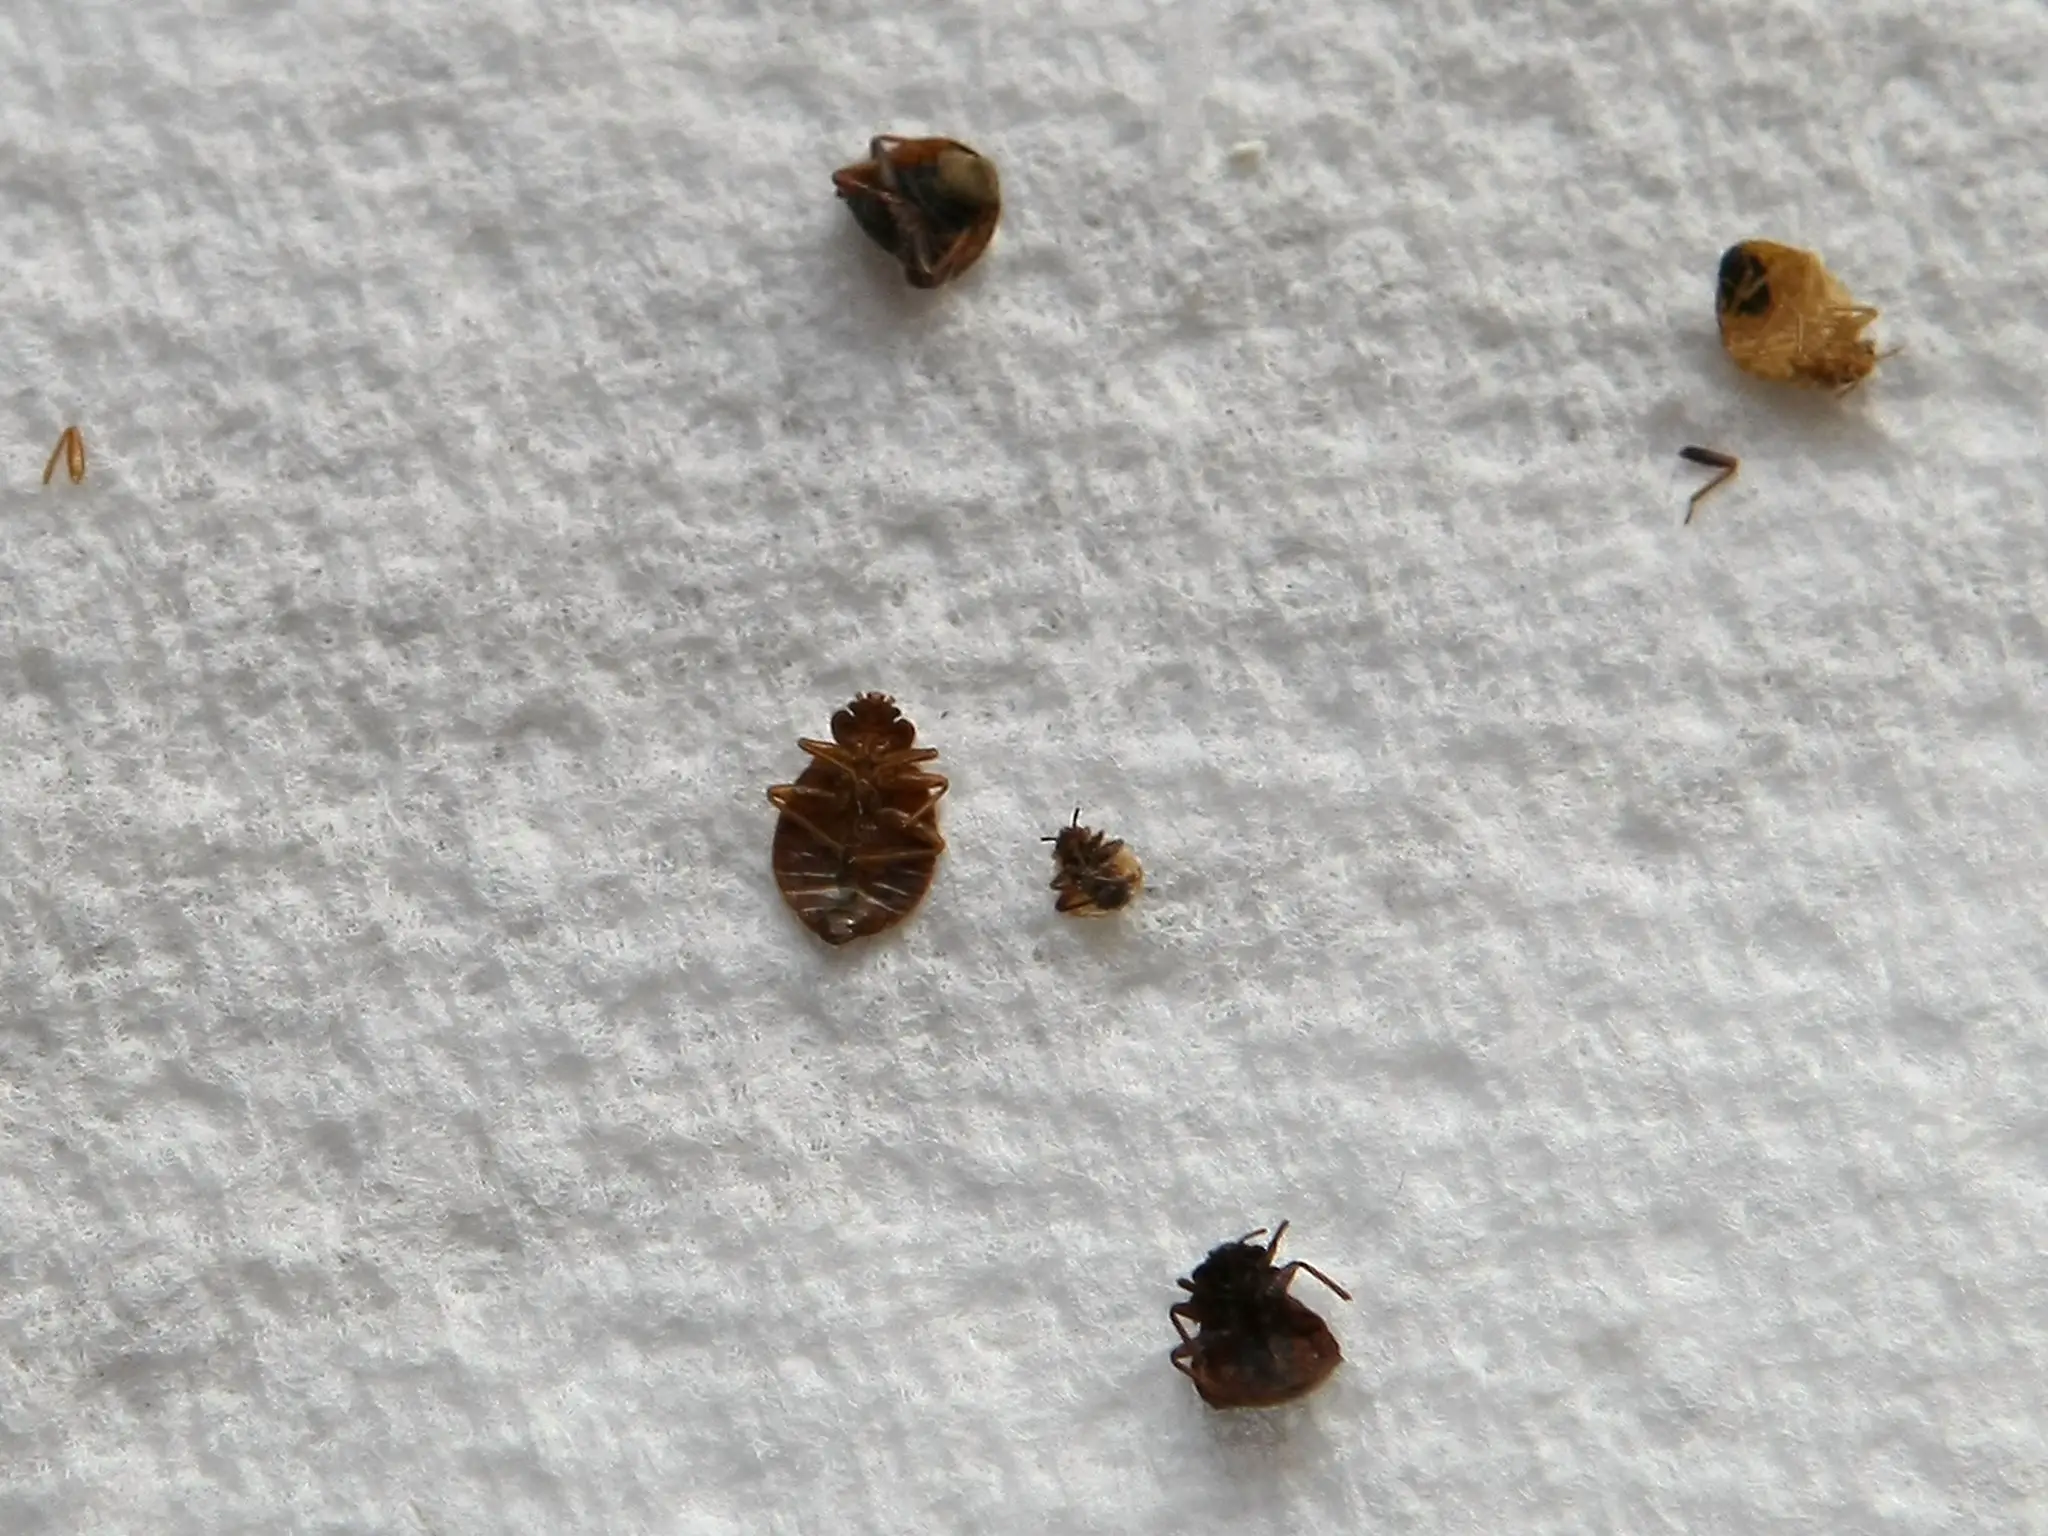 Do Bed Bugs Cause Itching?